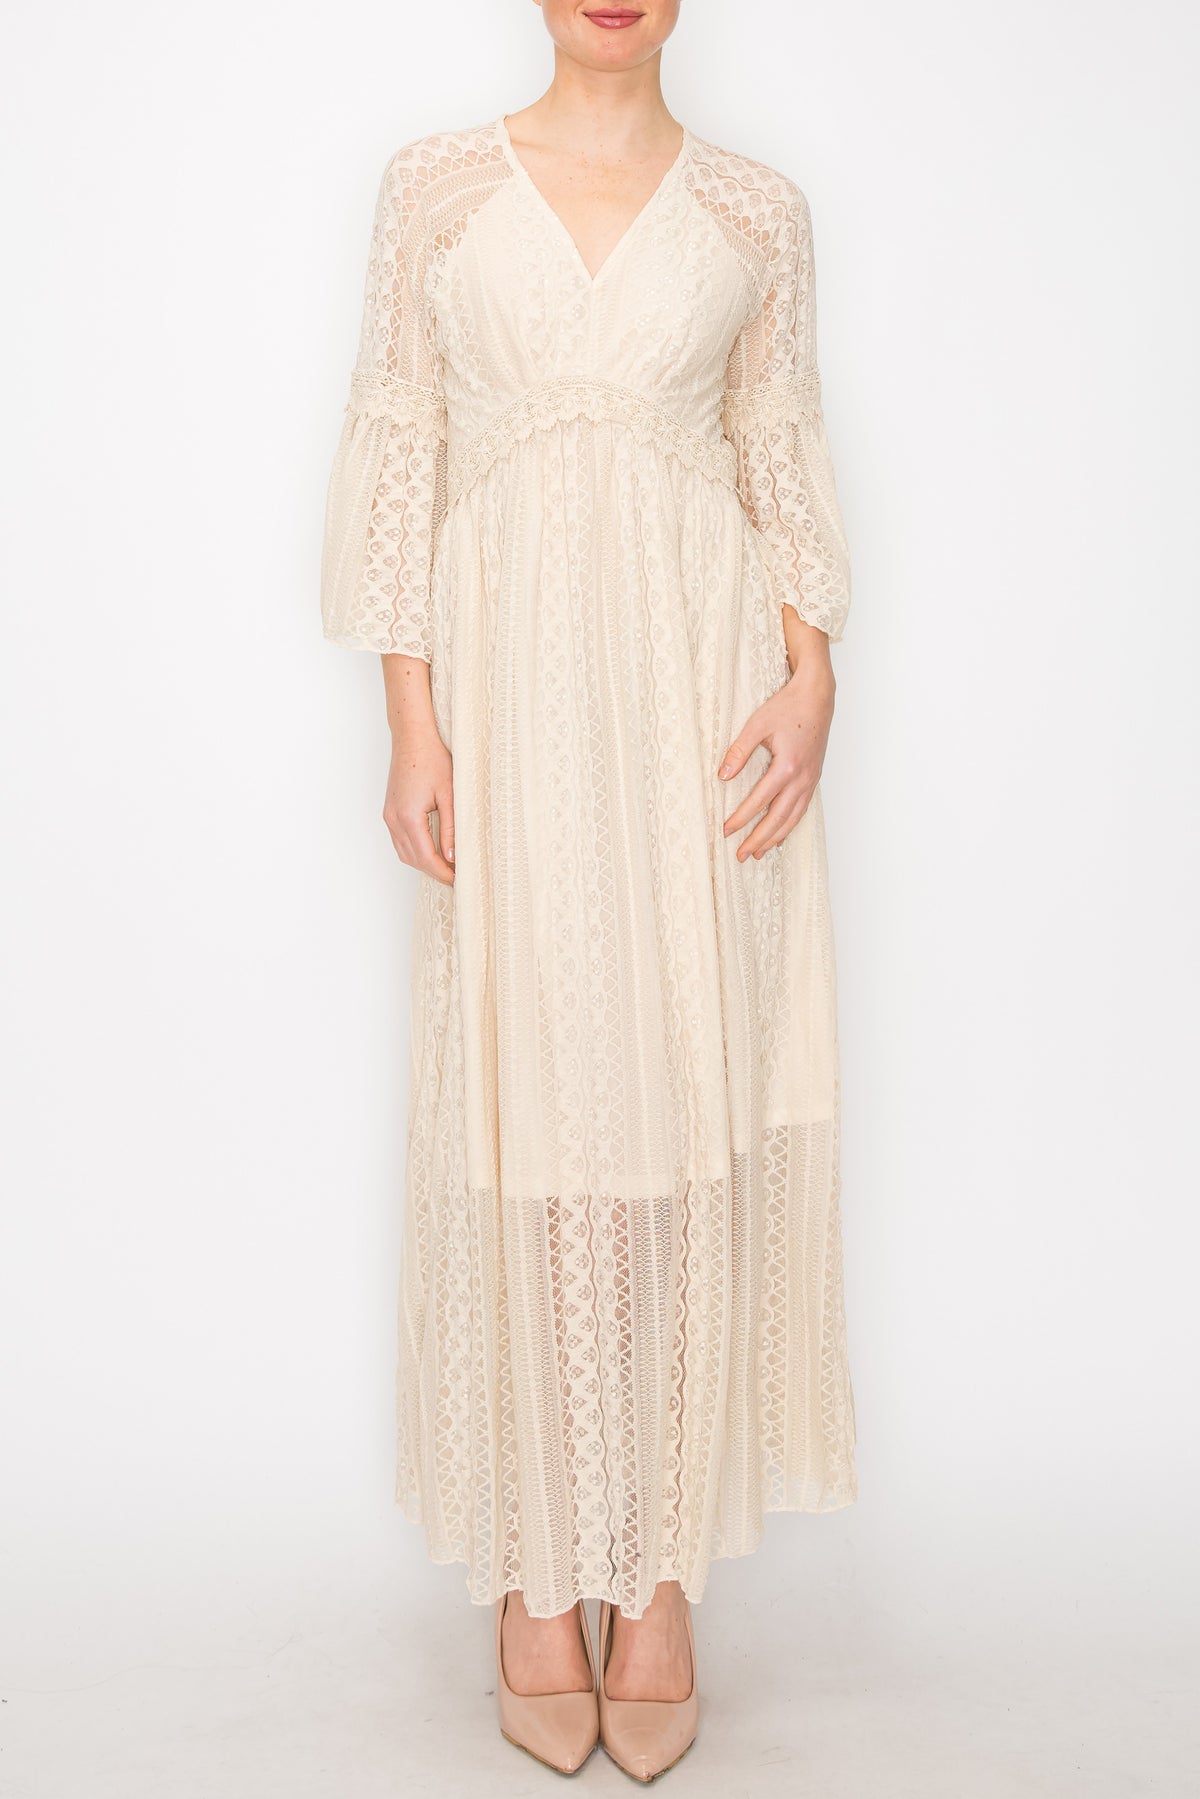 Sally Allover Lace Maxi Dress - Beige